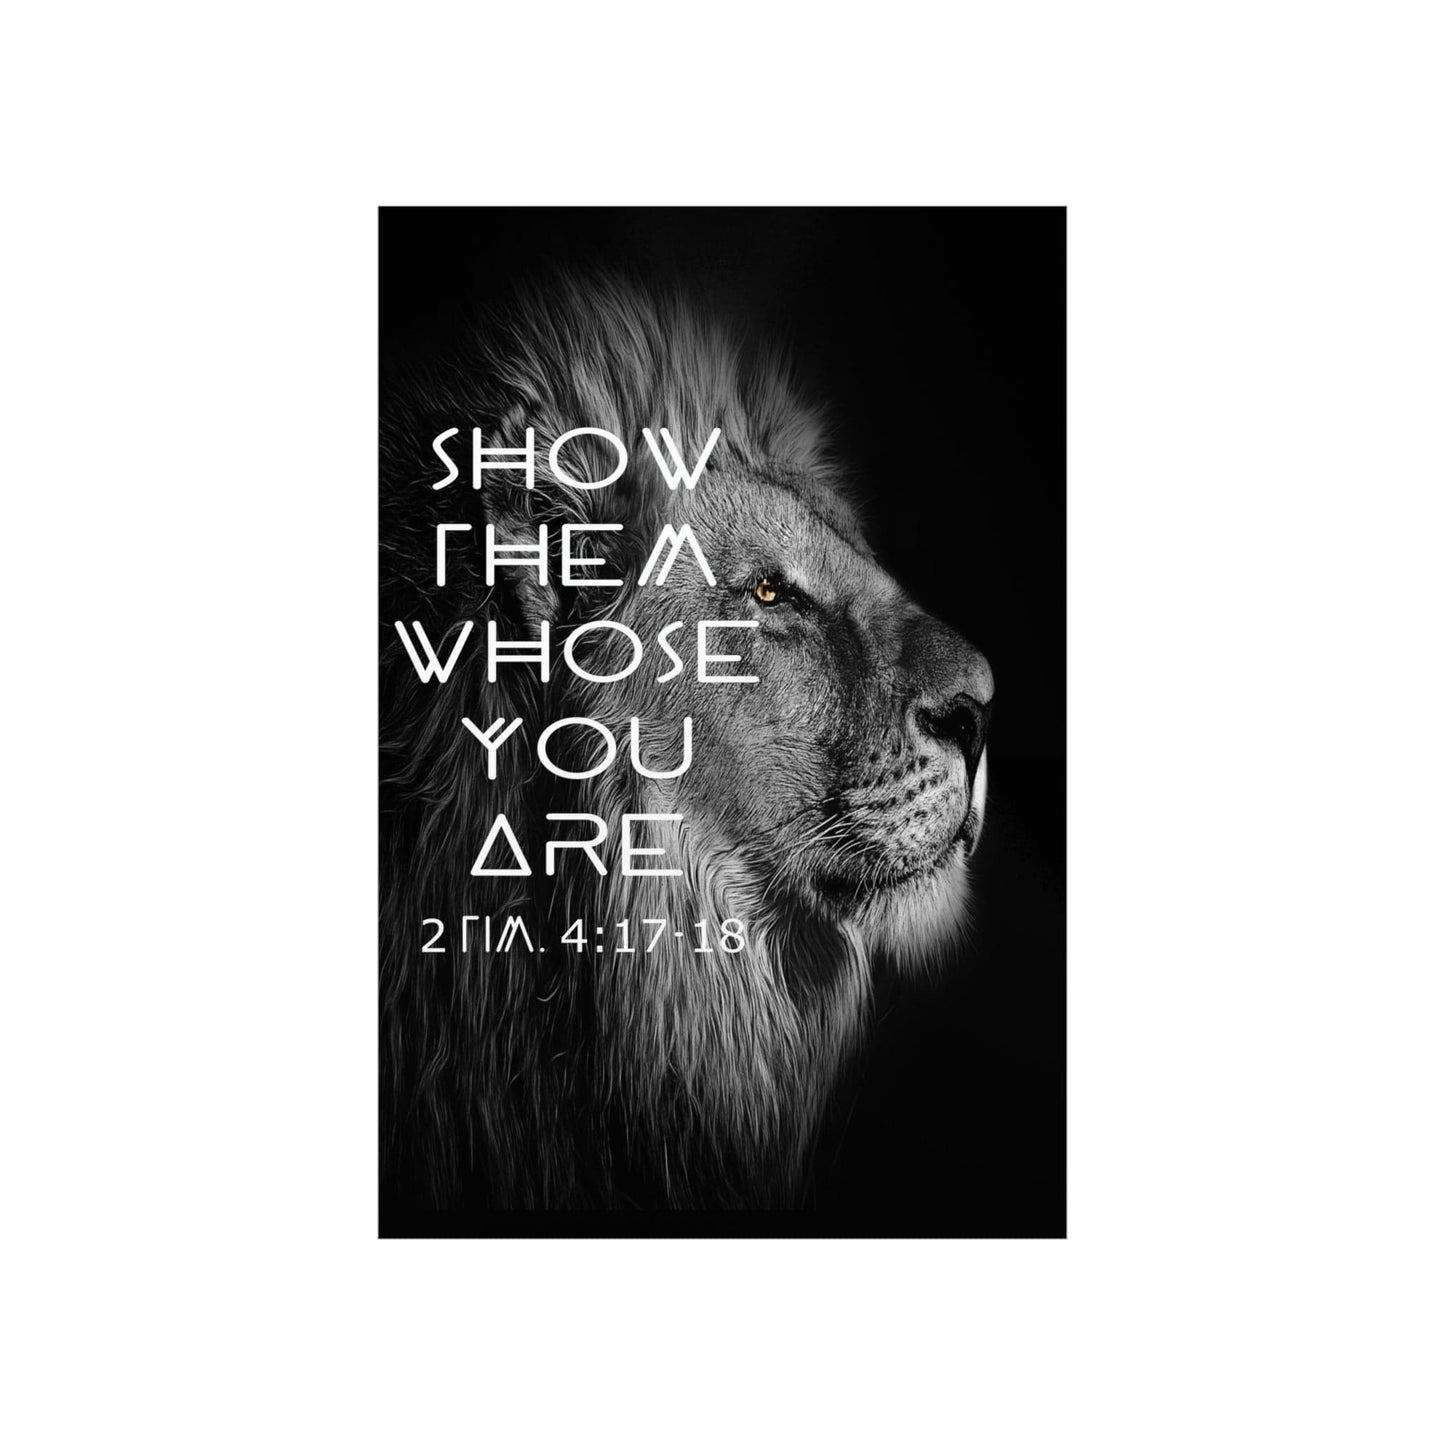 Printify Poster Show Them Whose You Are - 2 Tim. 4:17,18 Premium Christian Bible Verse Poster